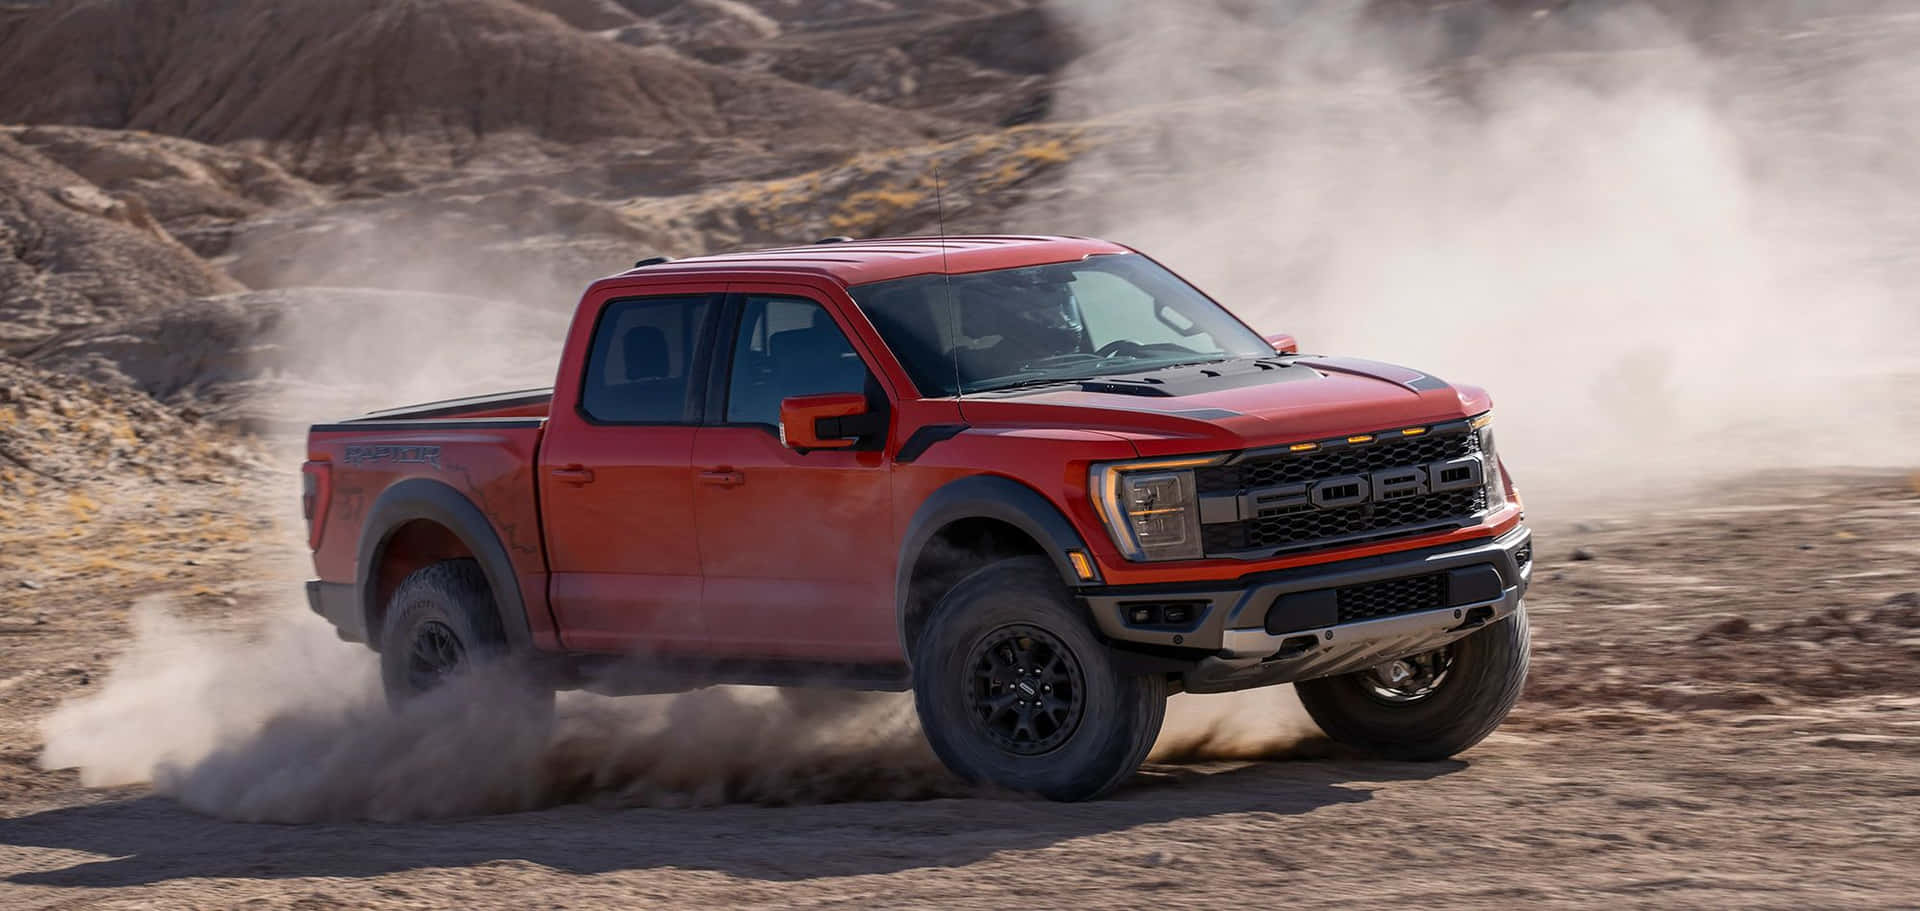 The Red 2019 Ford F-150 Rambo Is Driving Through The Desert Wallpaper